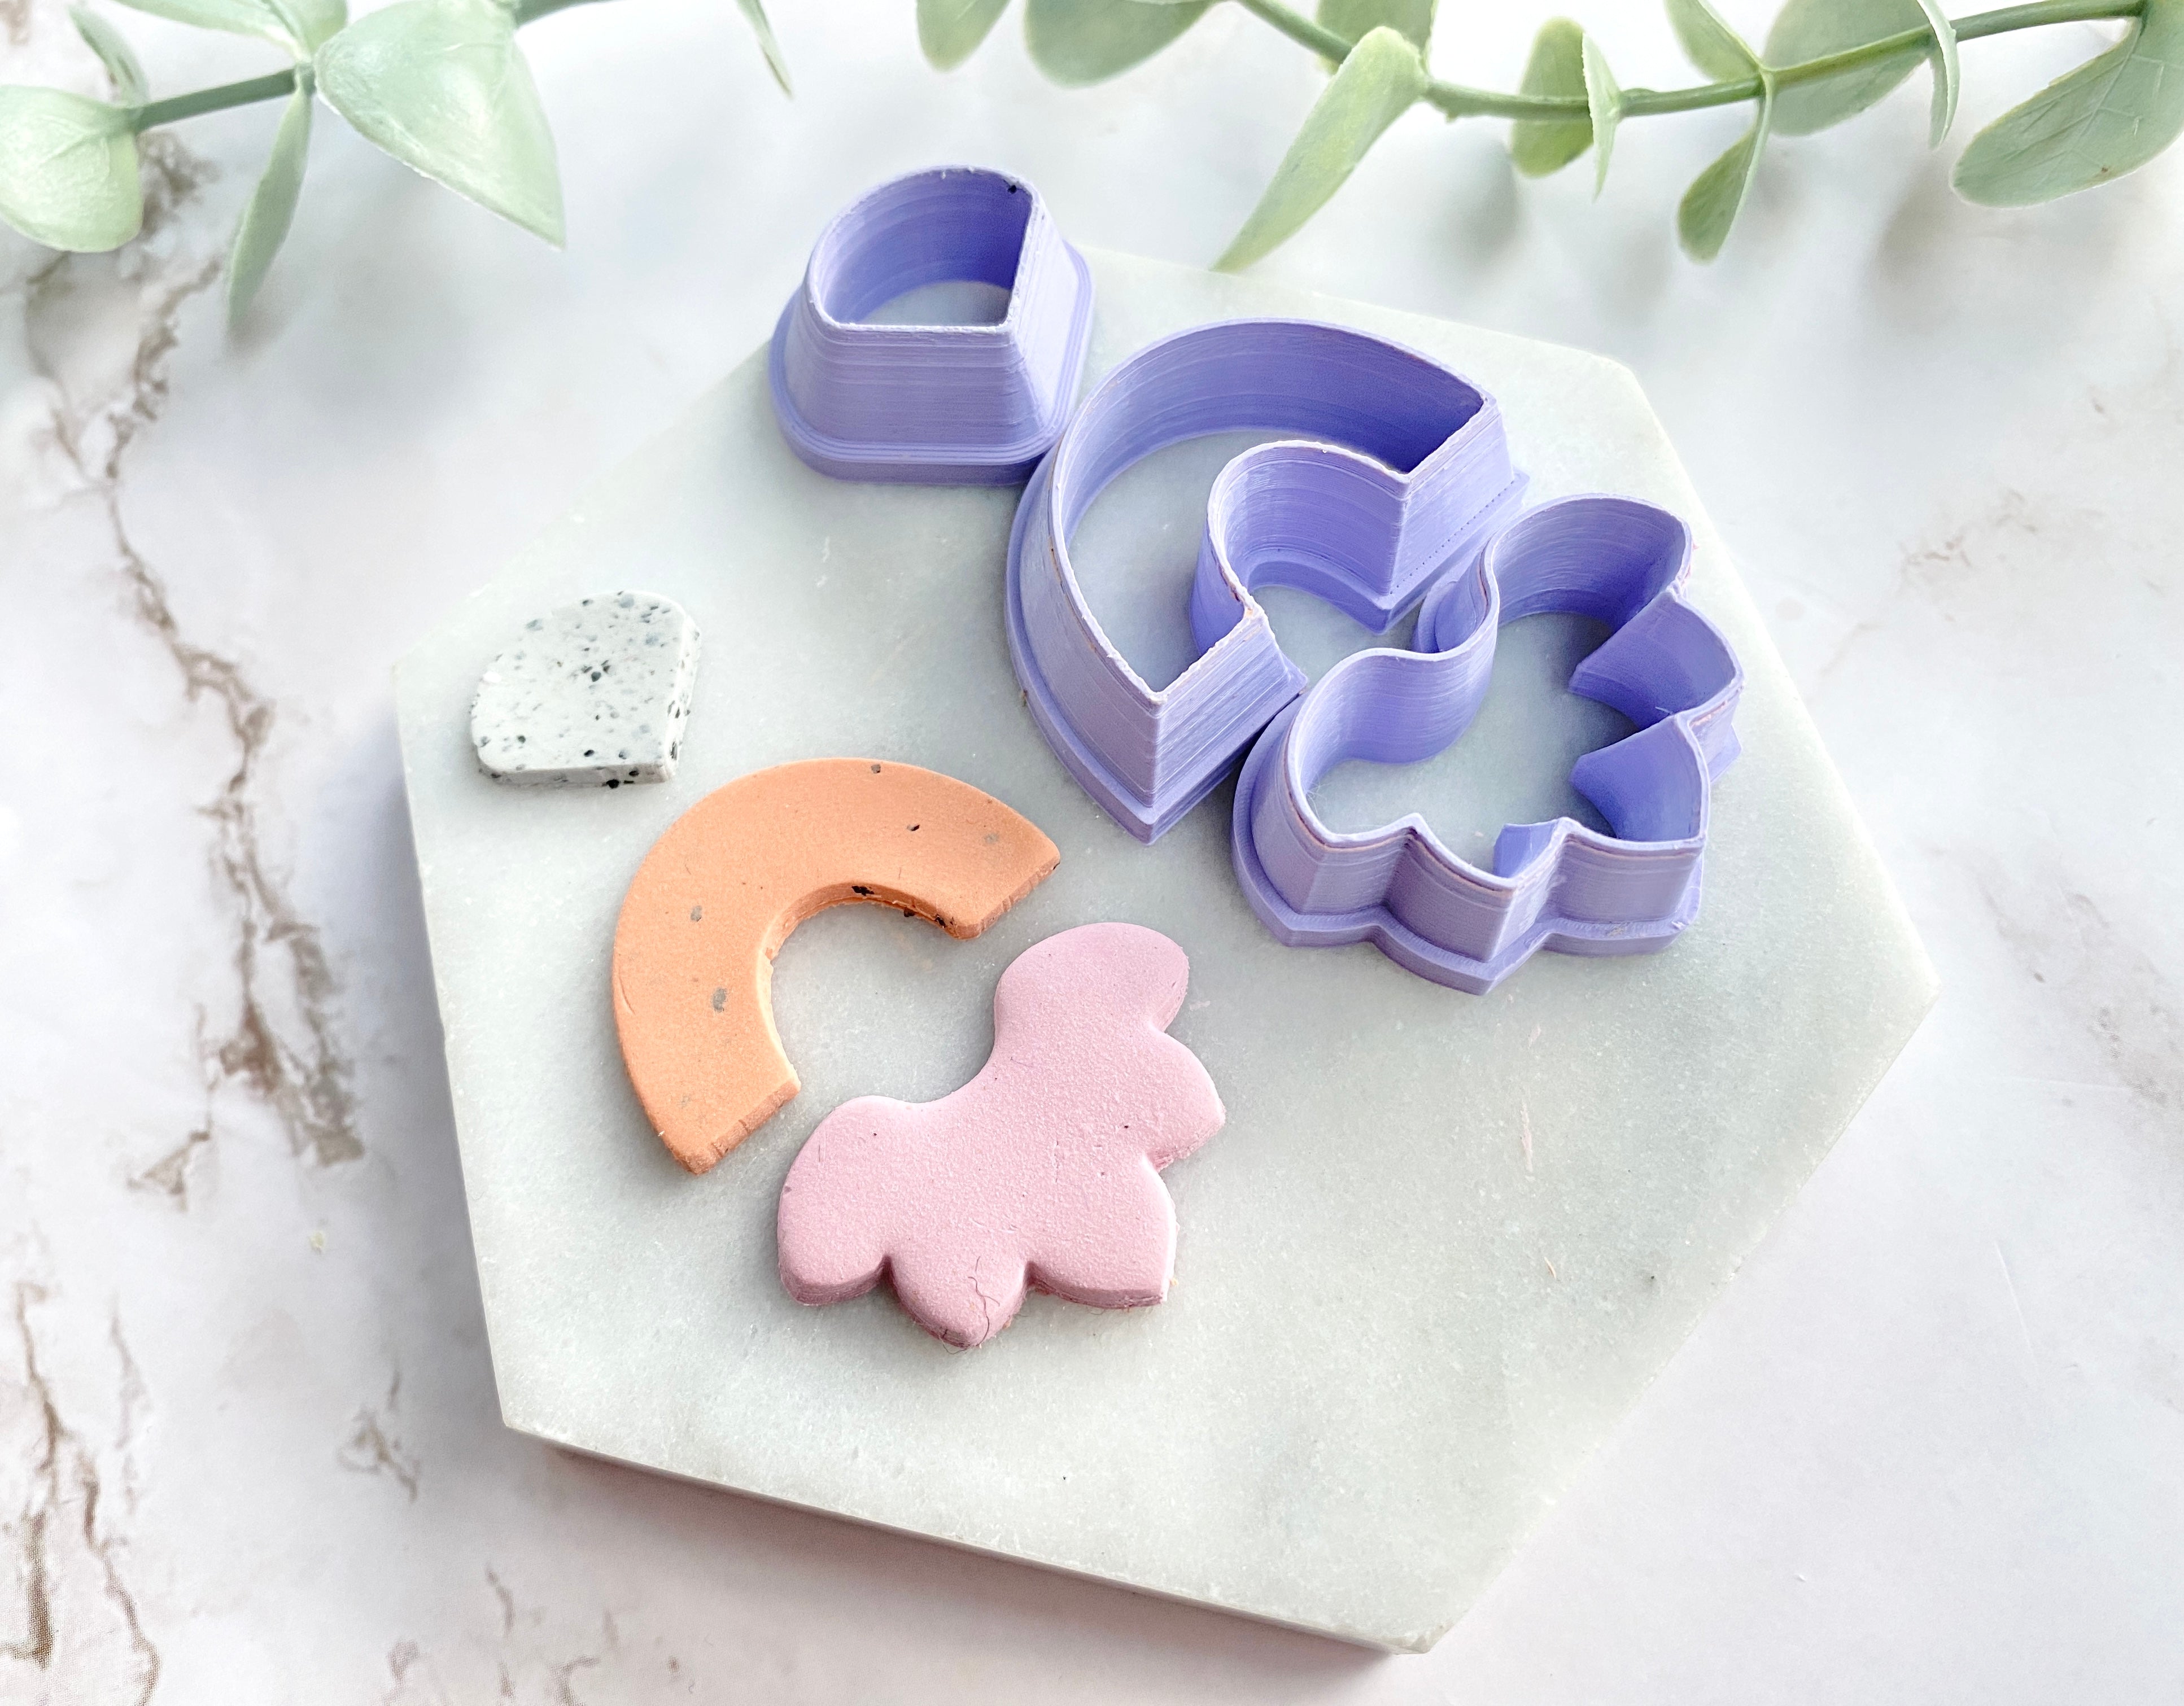 Arc, Fan and Floral Set Shaped Polymer Clay Cutter | Fondant Cutter | Cookie Cutter